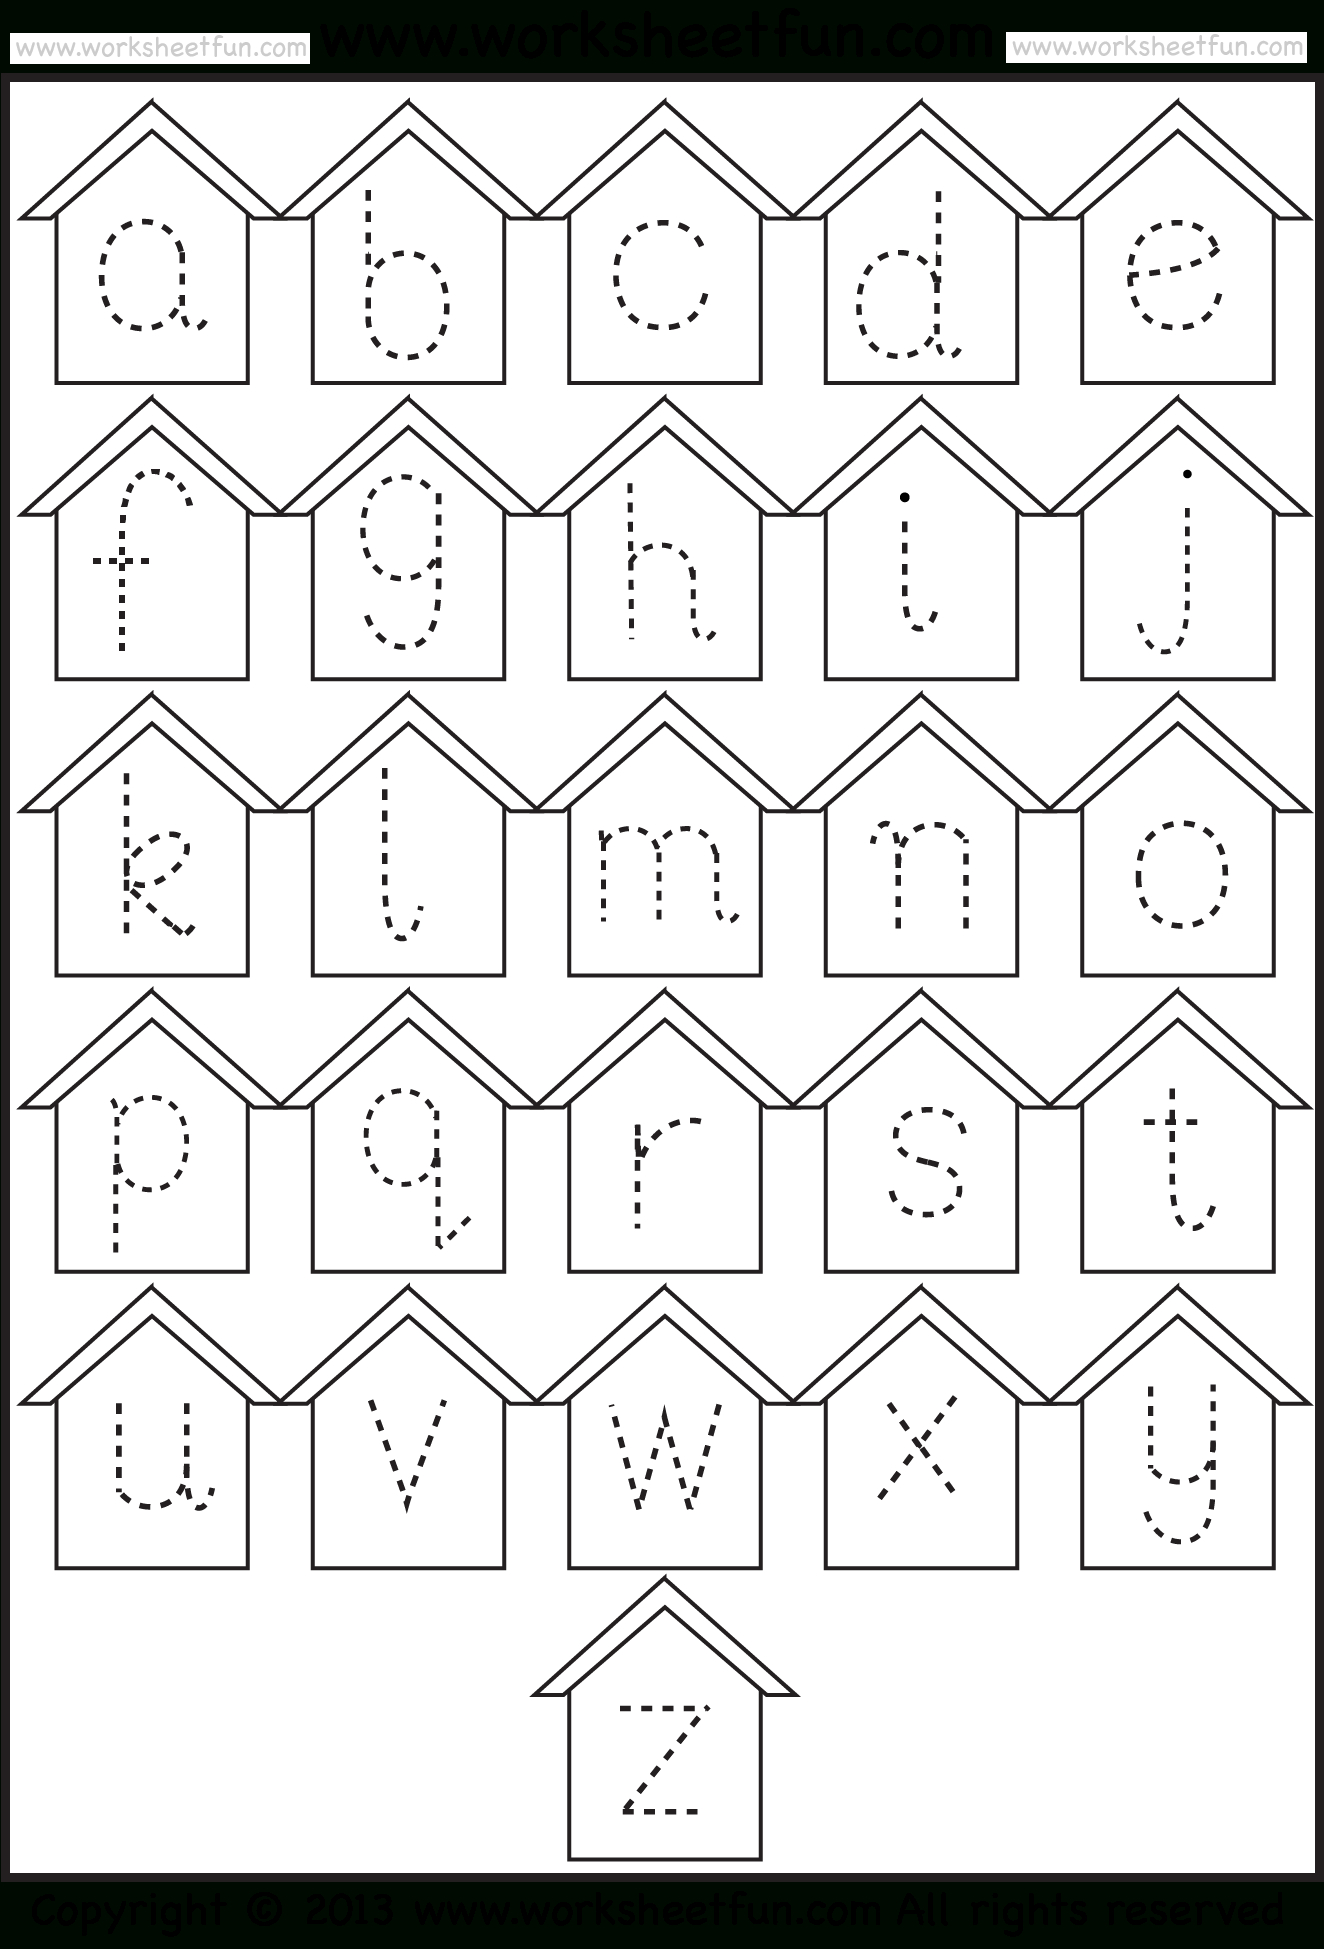 Free Tracing Letters Worksheet | Printable Worksheets And with regard to Letter Tracing Worksheets Lower Case